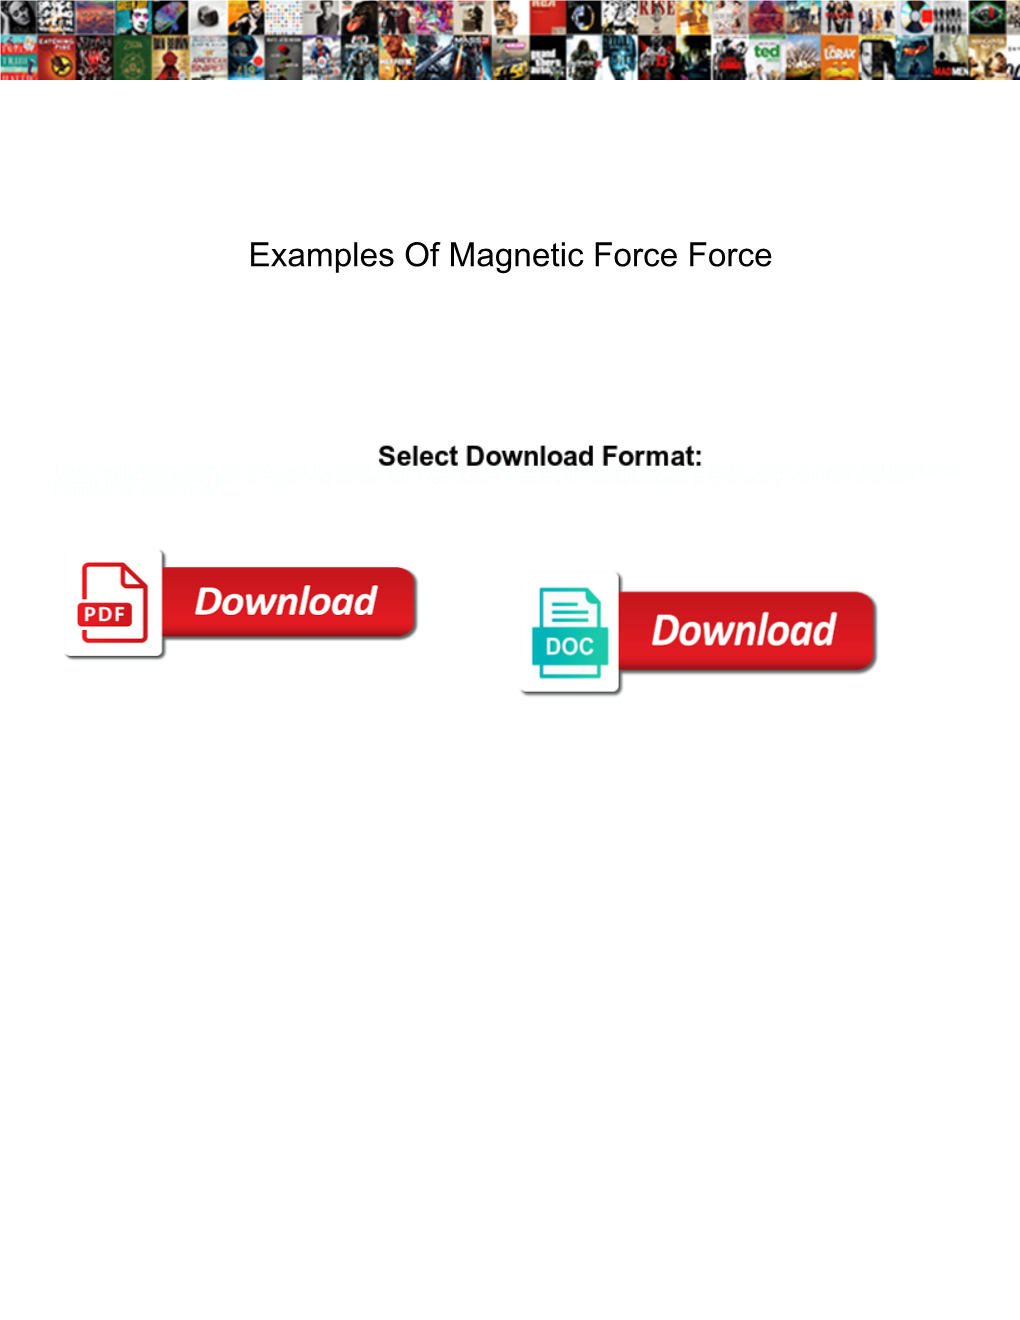 Examples of Magnetic Force Force